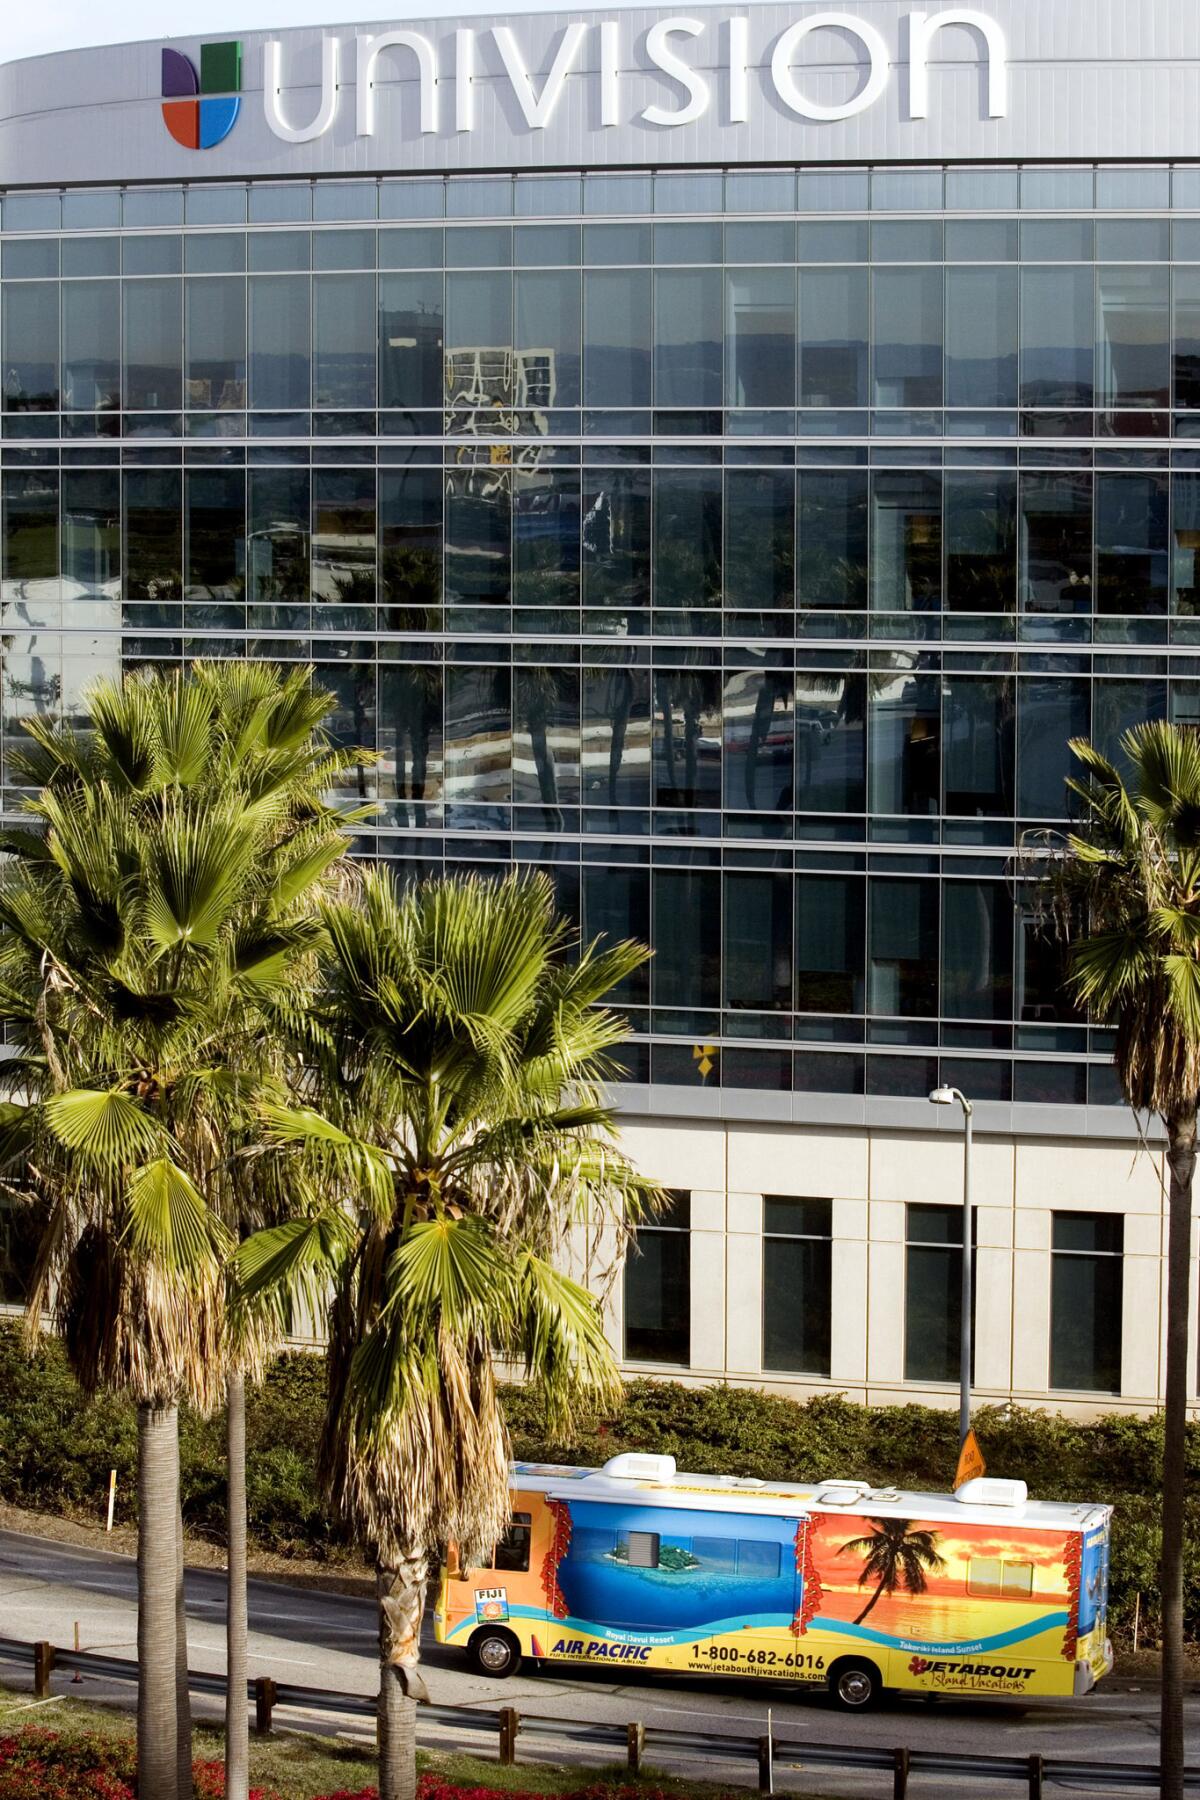 Univision, after more than a year of negotiations, has received carriage for its Univision Deportes sports channel on Comcast cable systems. Above, Univision offices in L.A.